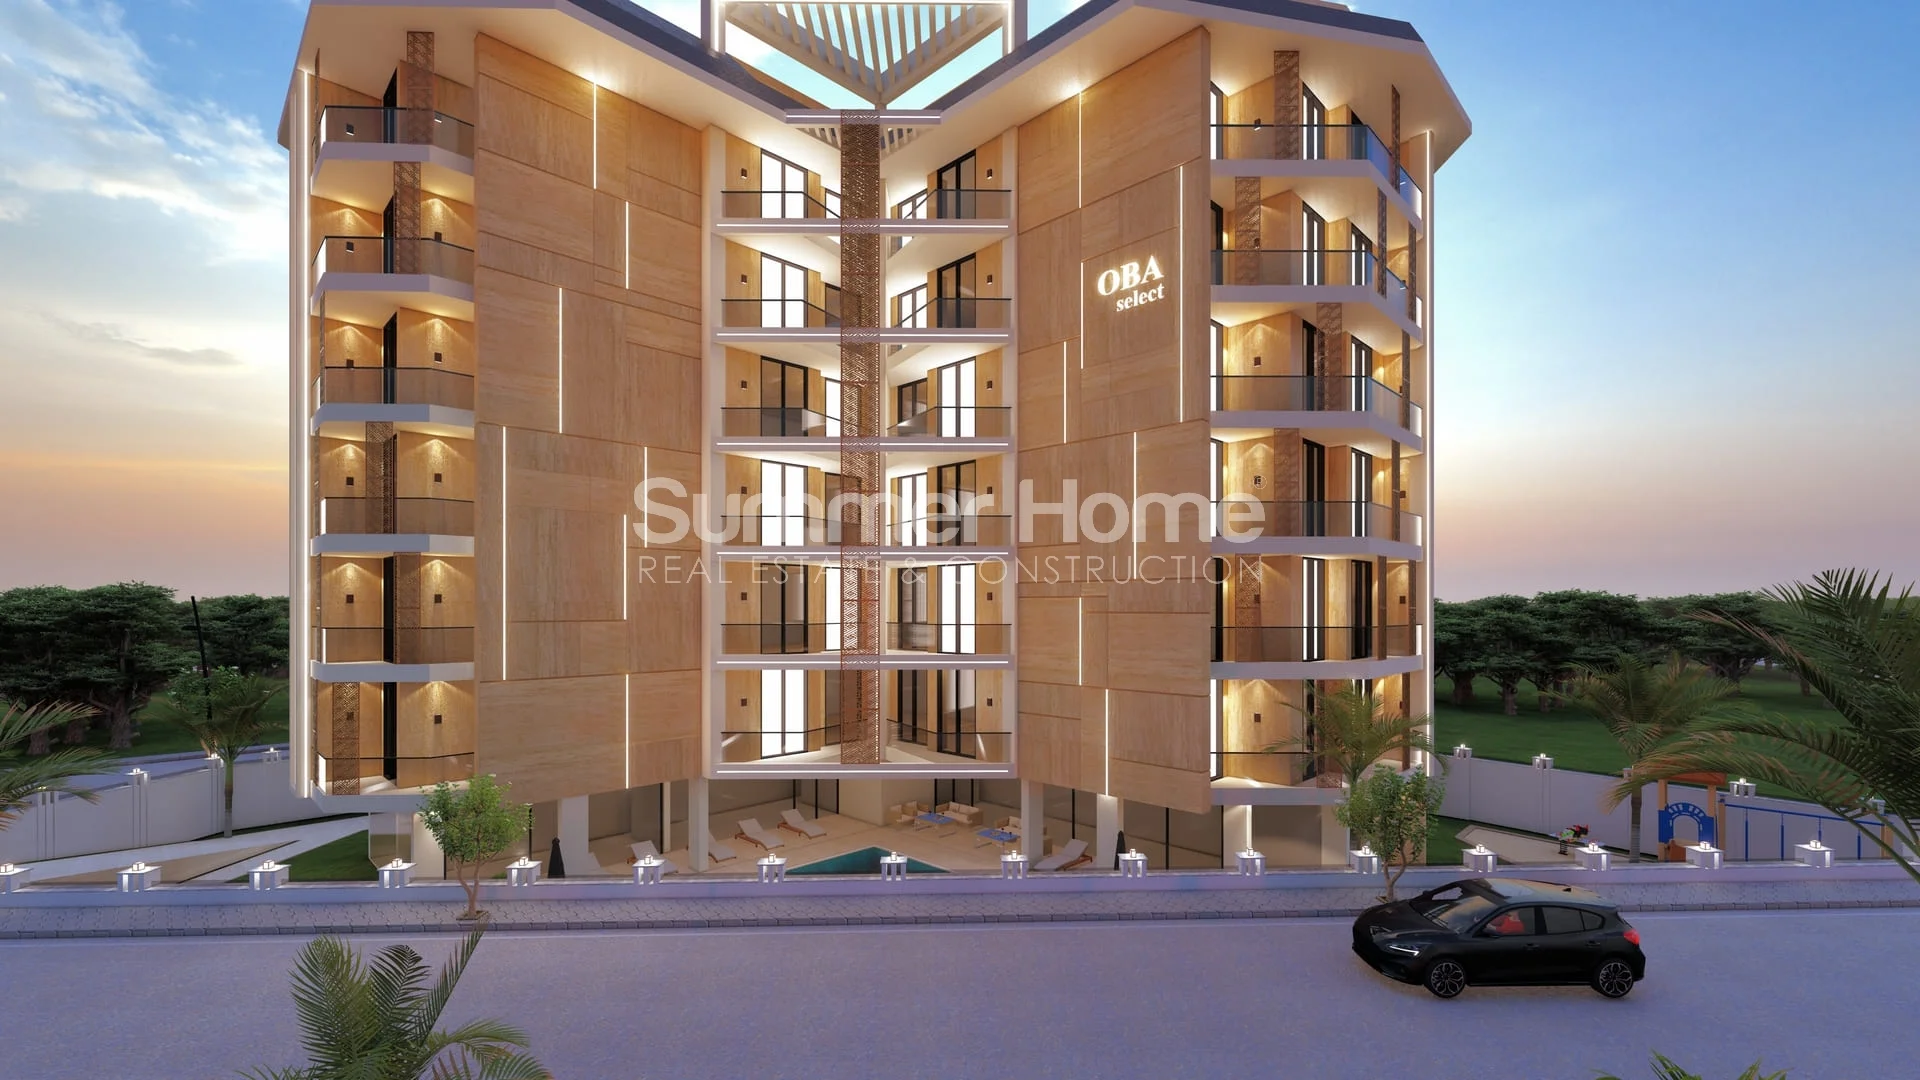 Contemporay Brand New Apartments For Sale in Beautiful Oba, Alanya Facilities - 9